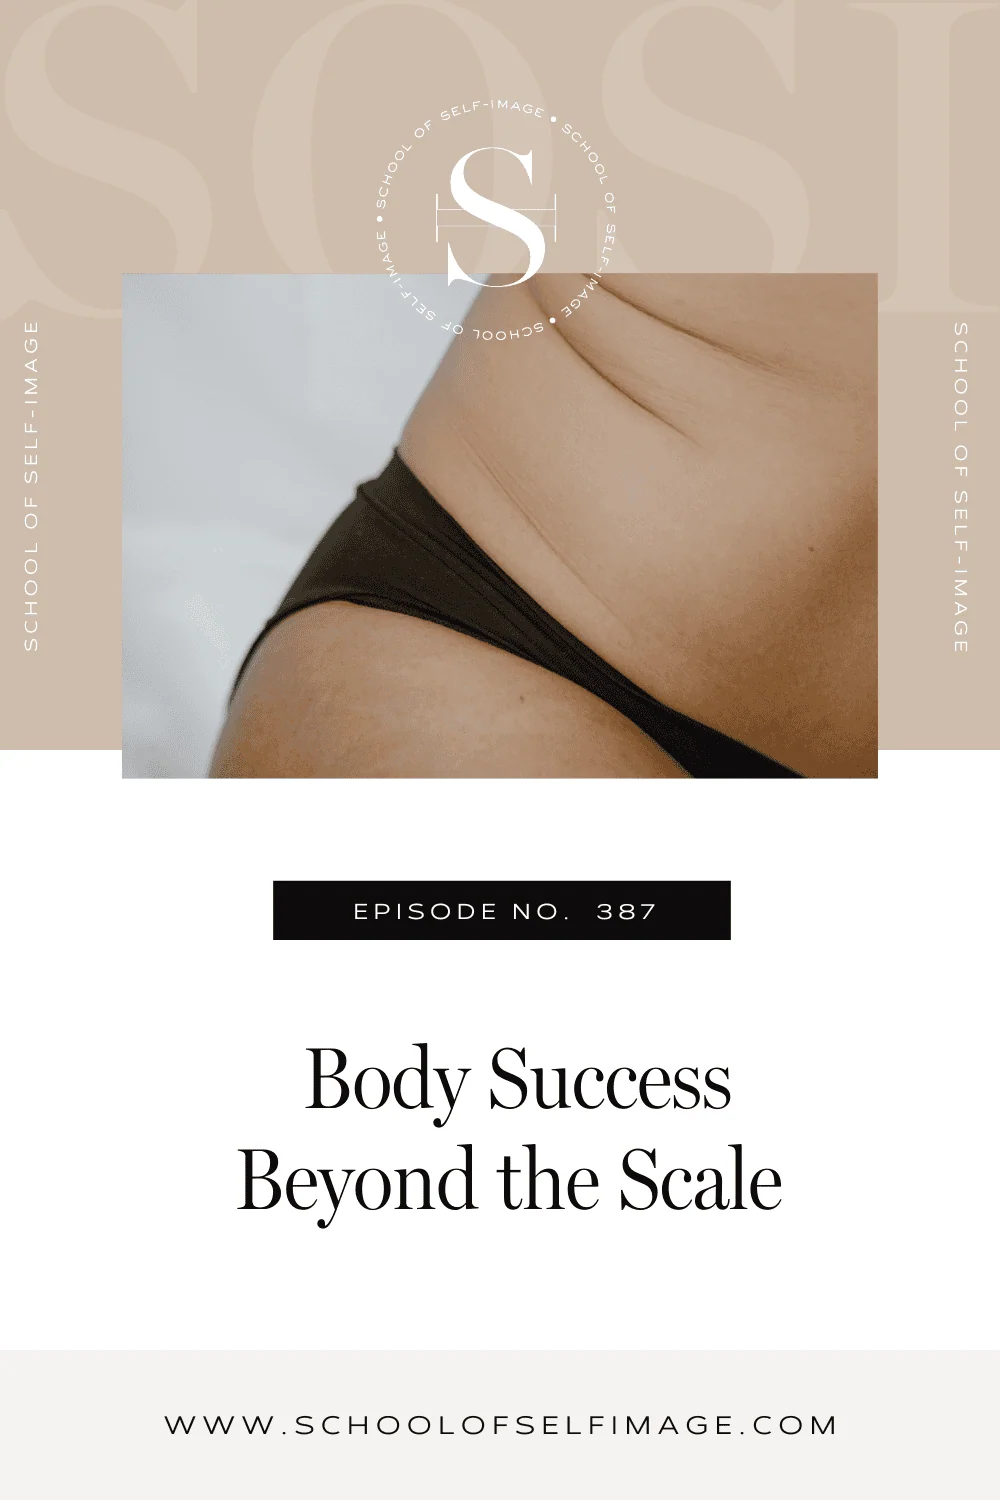 Body Sucess Beyond the Scale